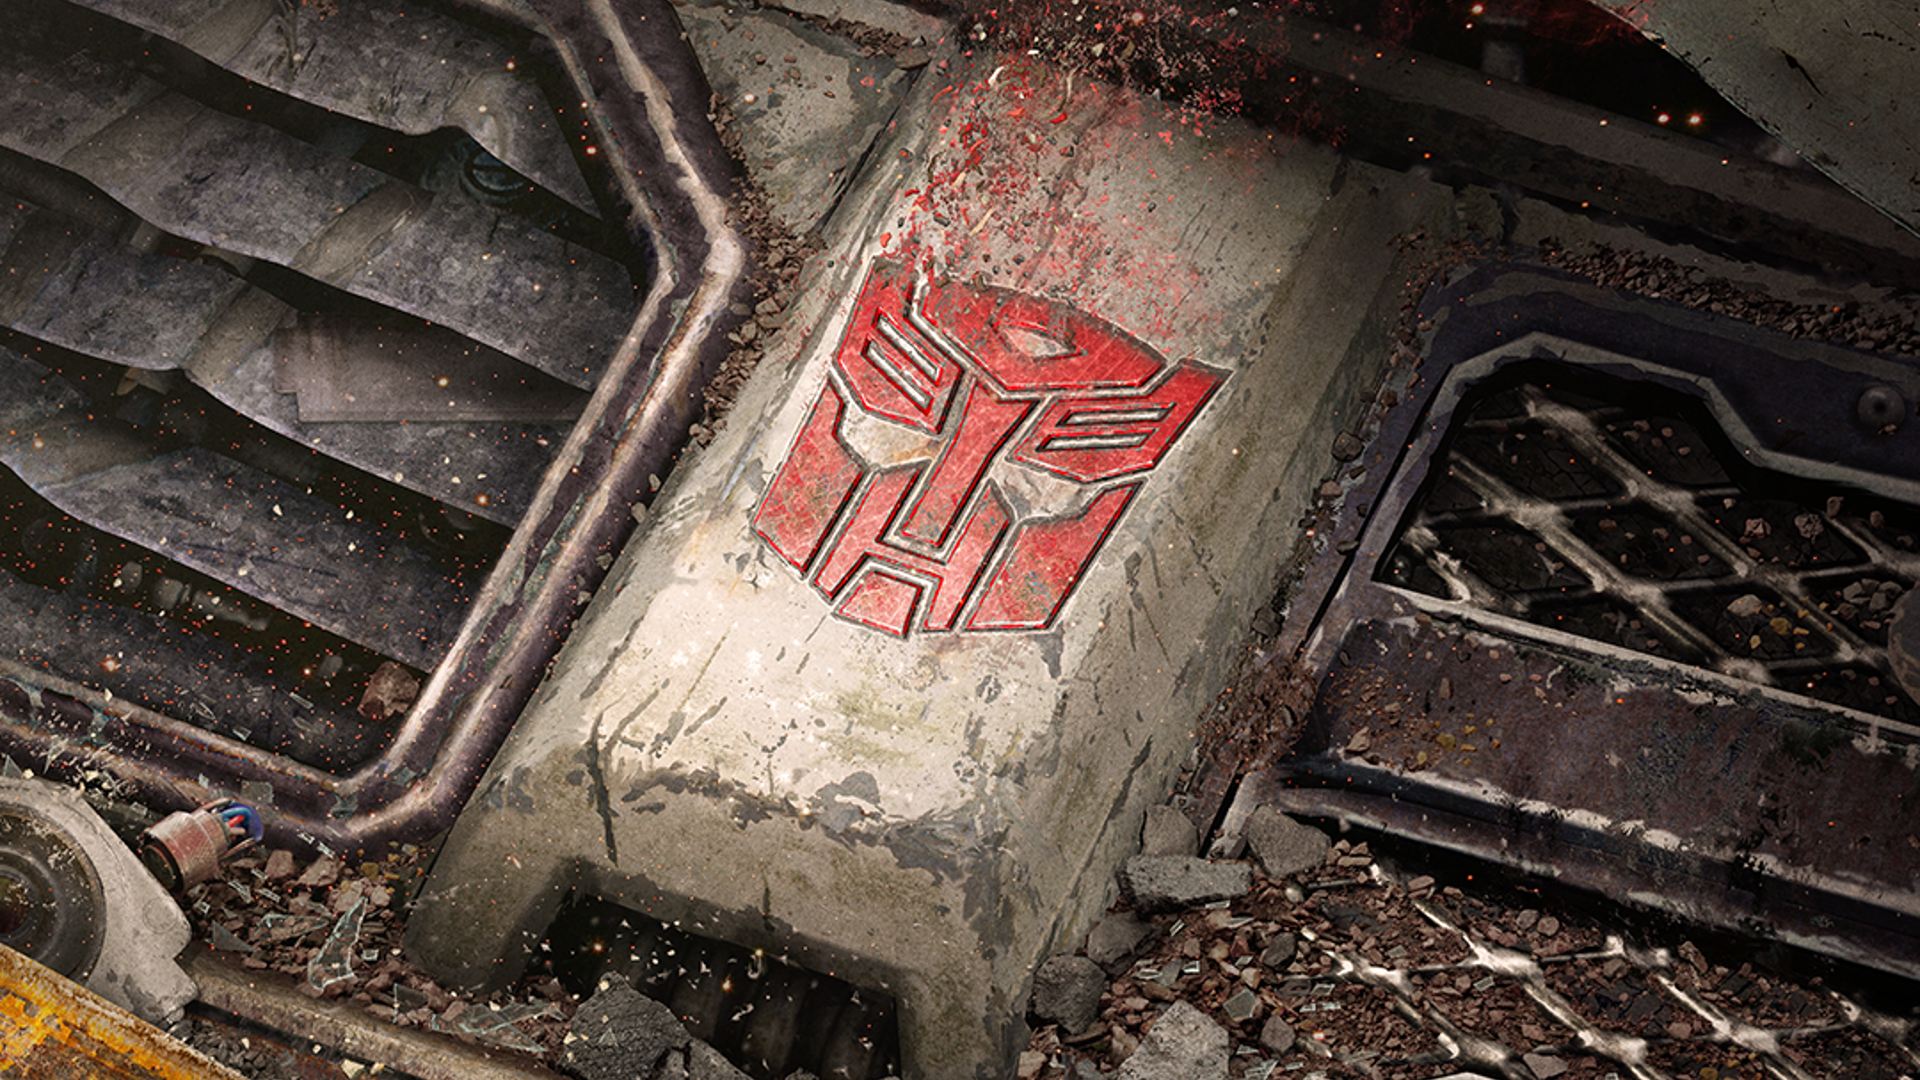 Transformers Reactivate: A Transformers symbol can be seen